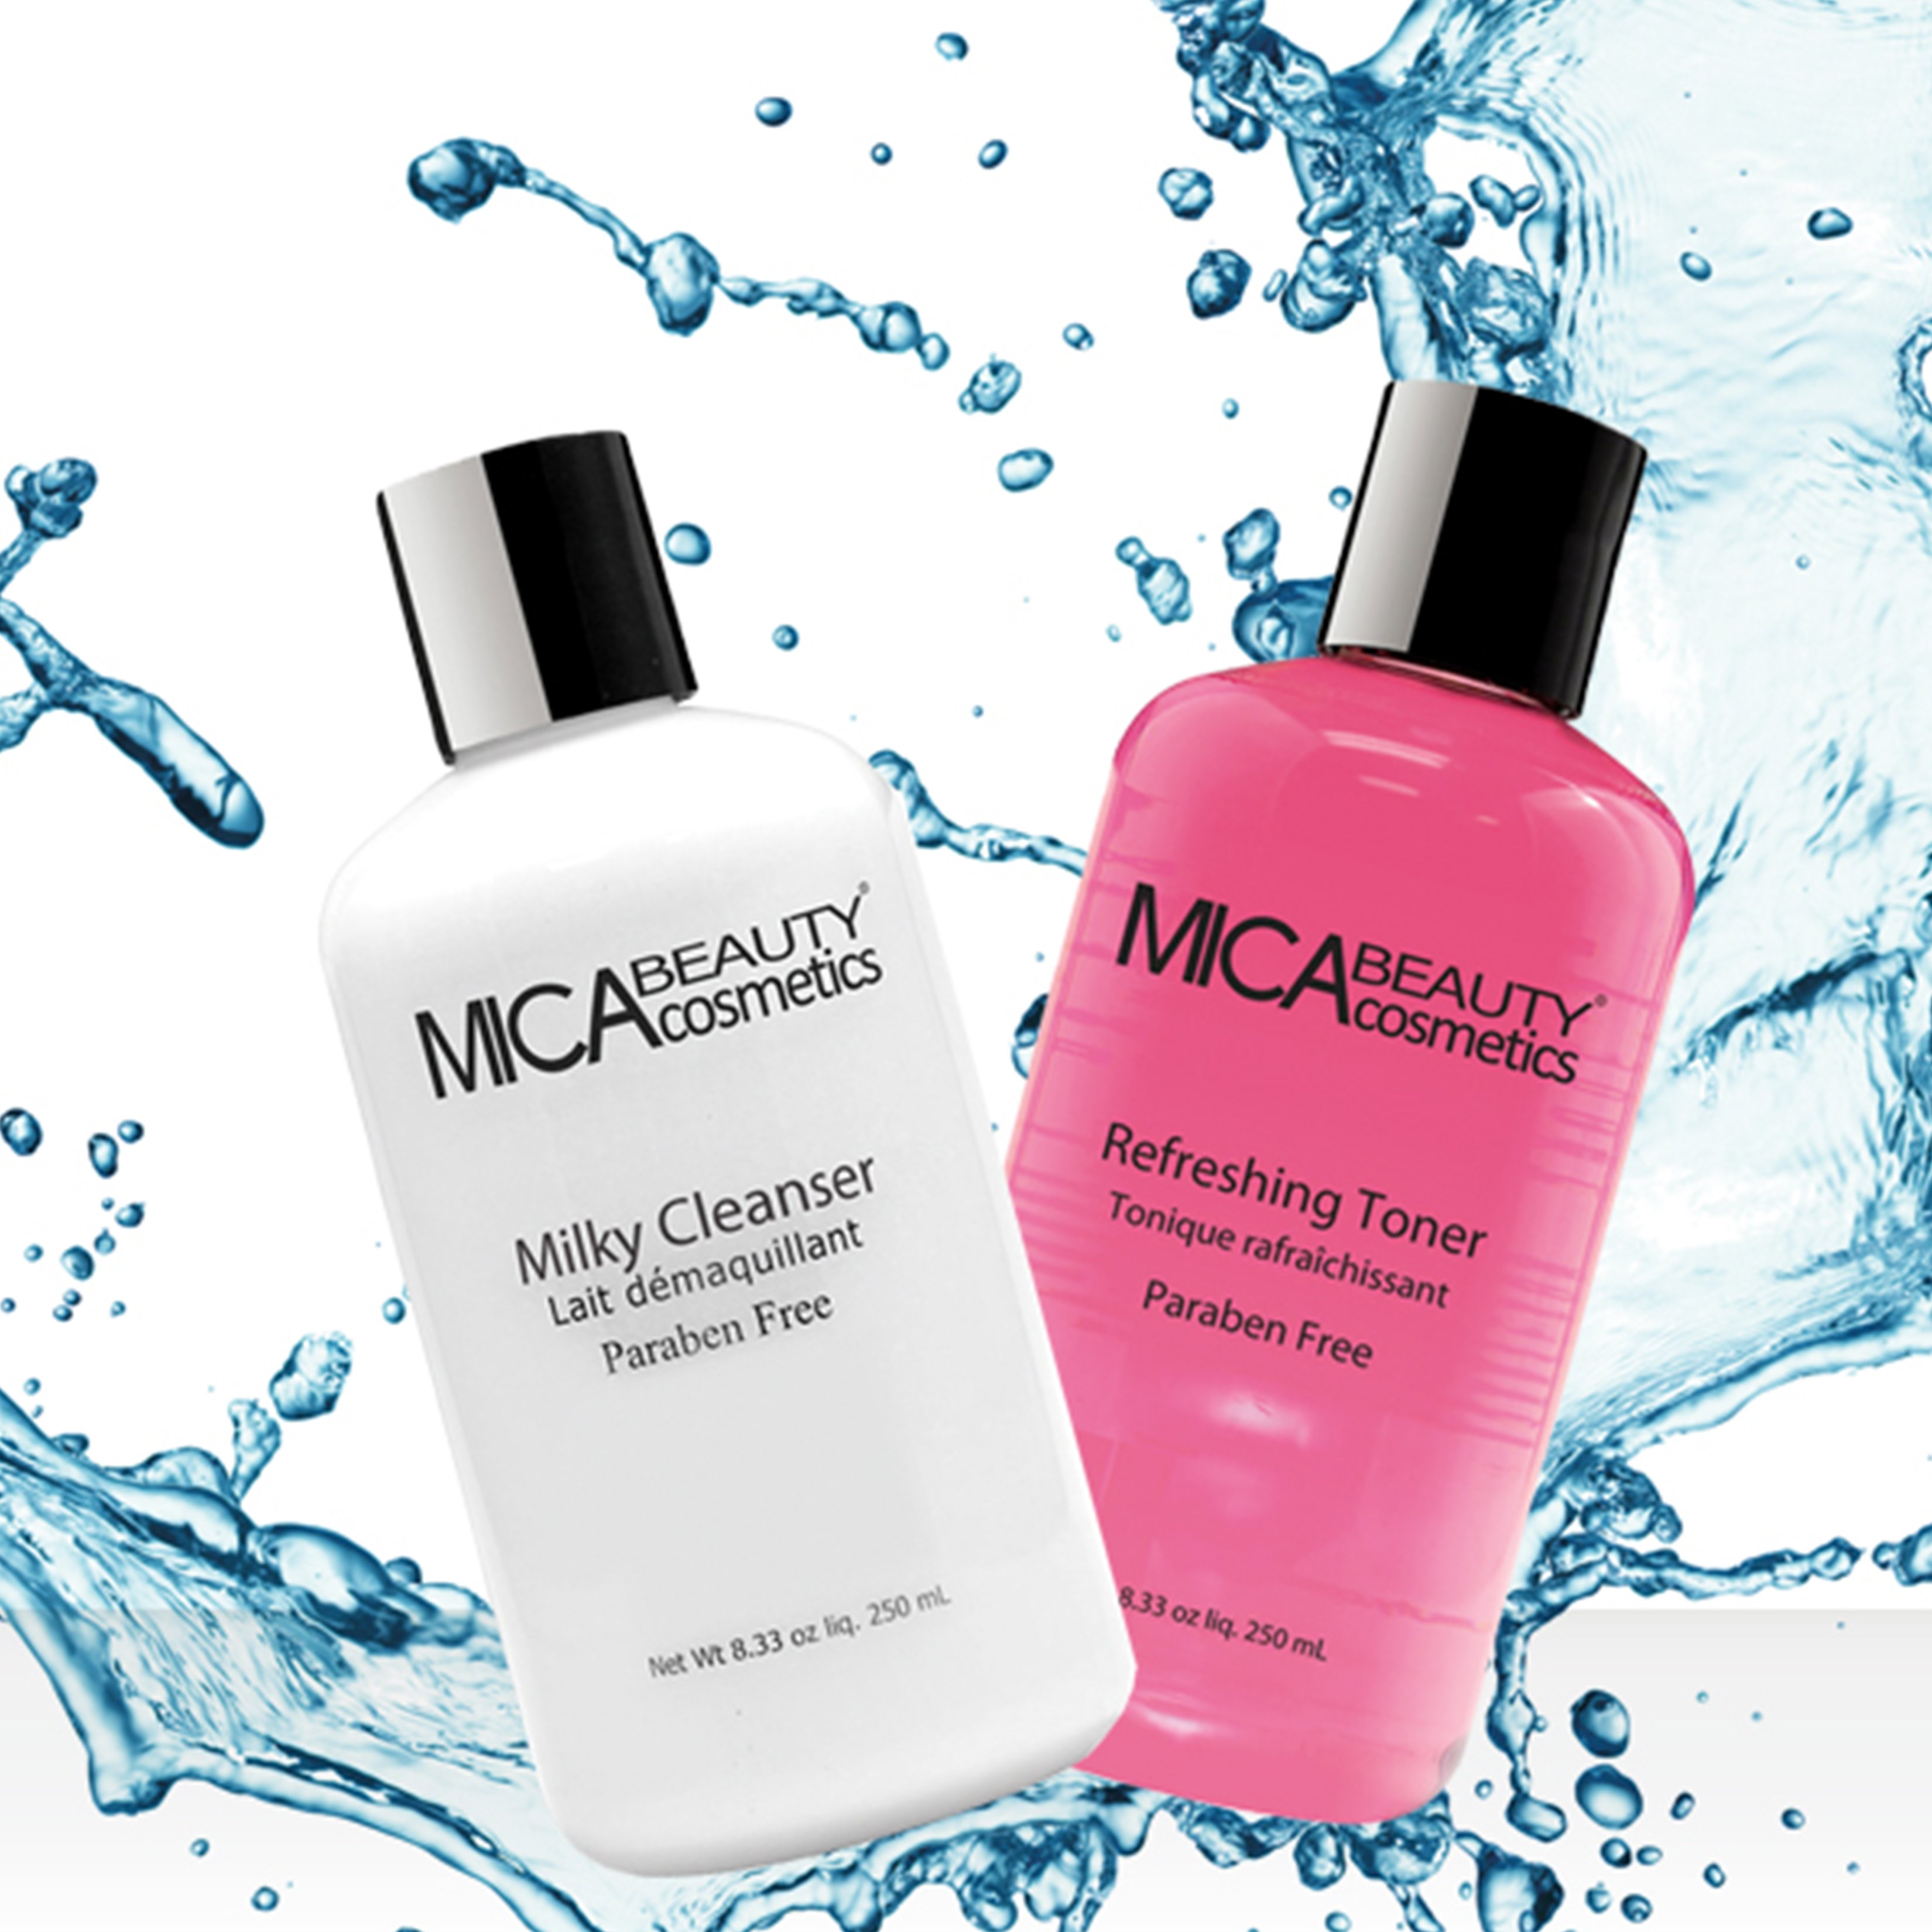 Milk Cleanser Refreshing Toner Bundle Mica Beauty Mineral Makeup Skincare Accessories